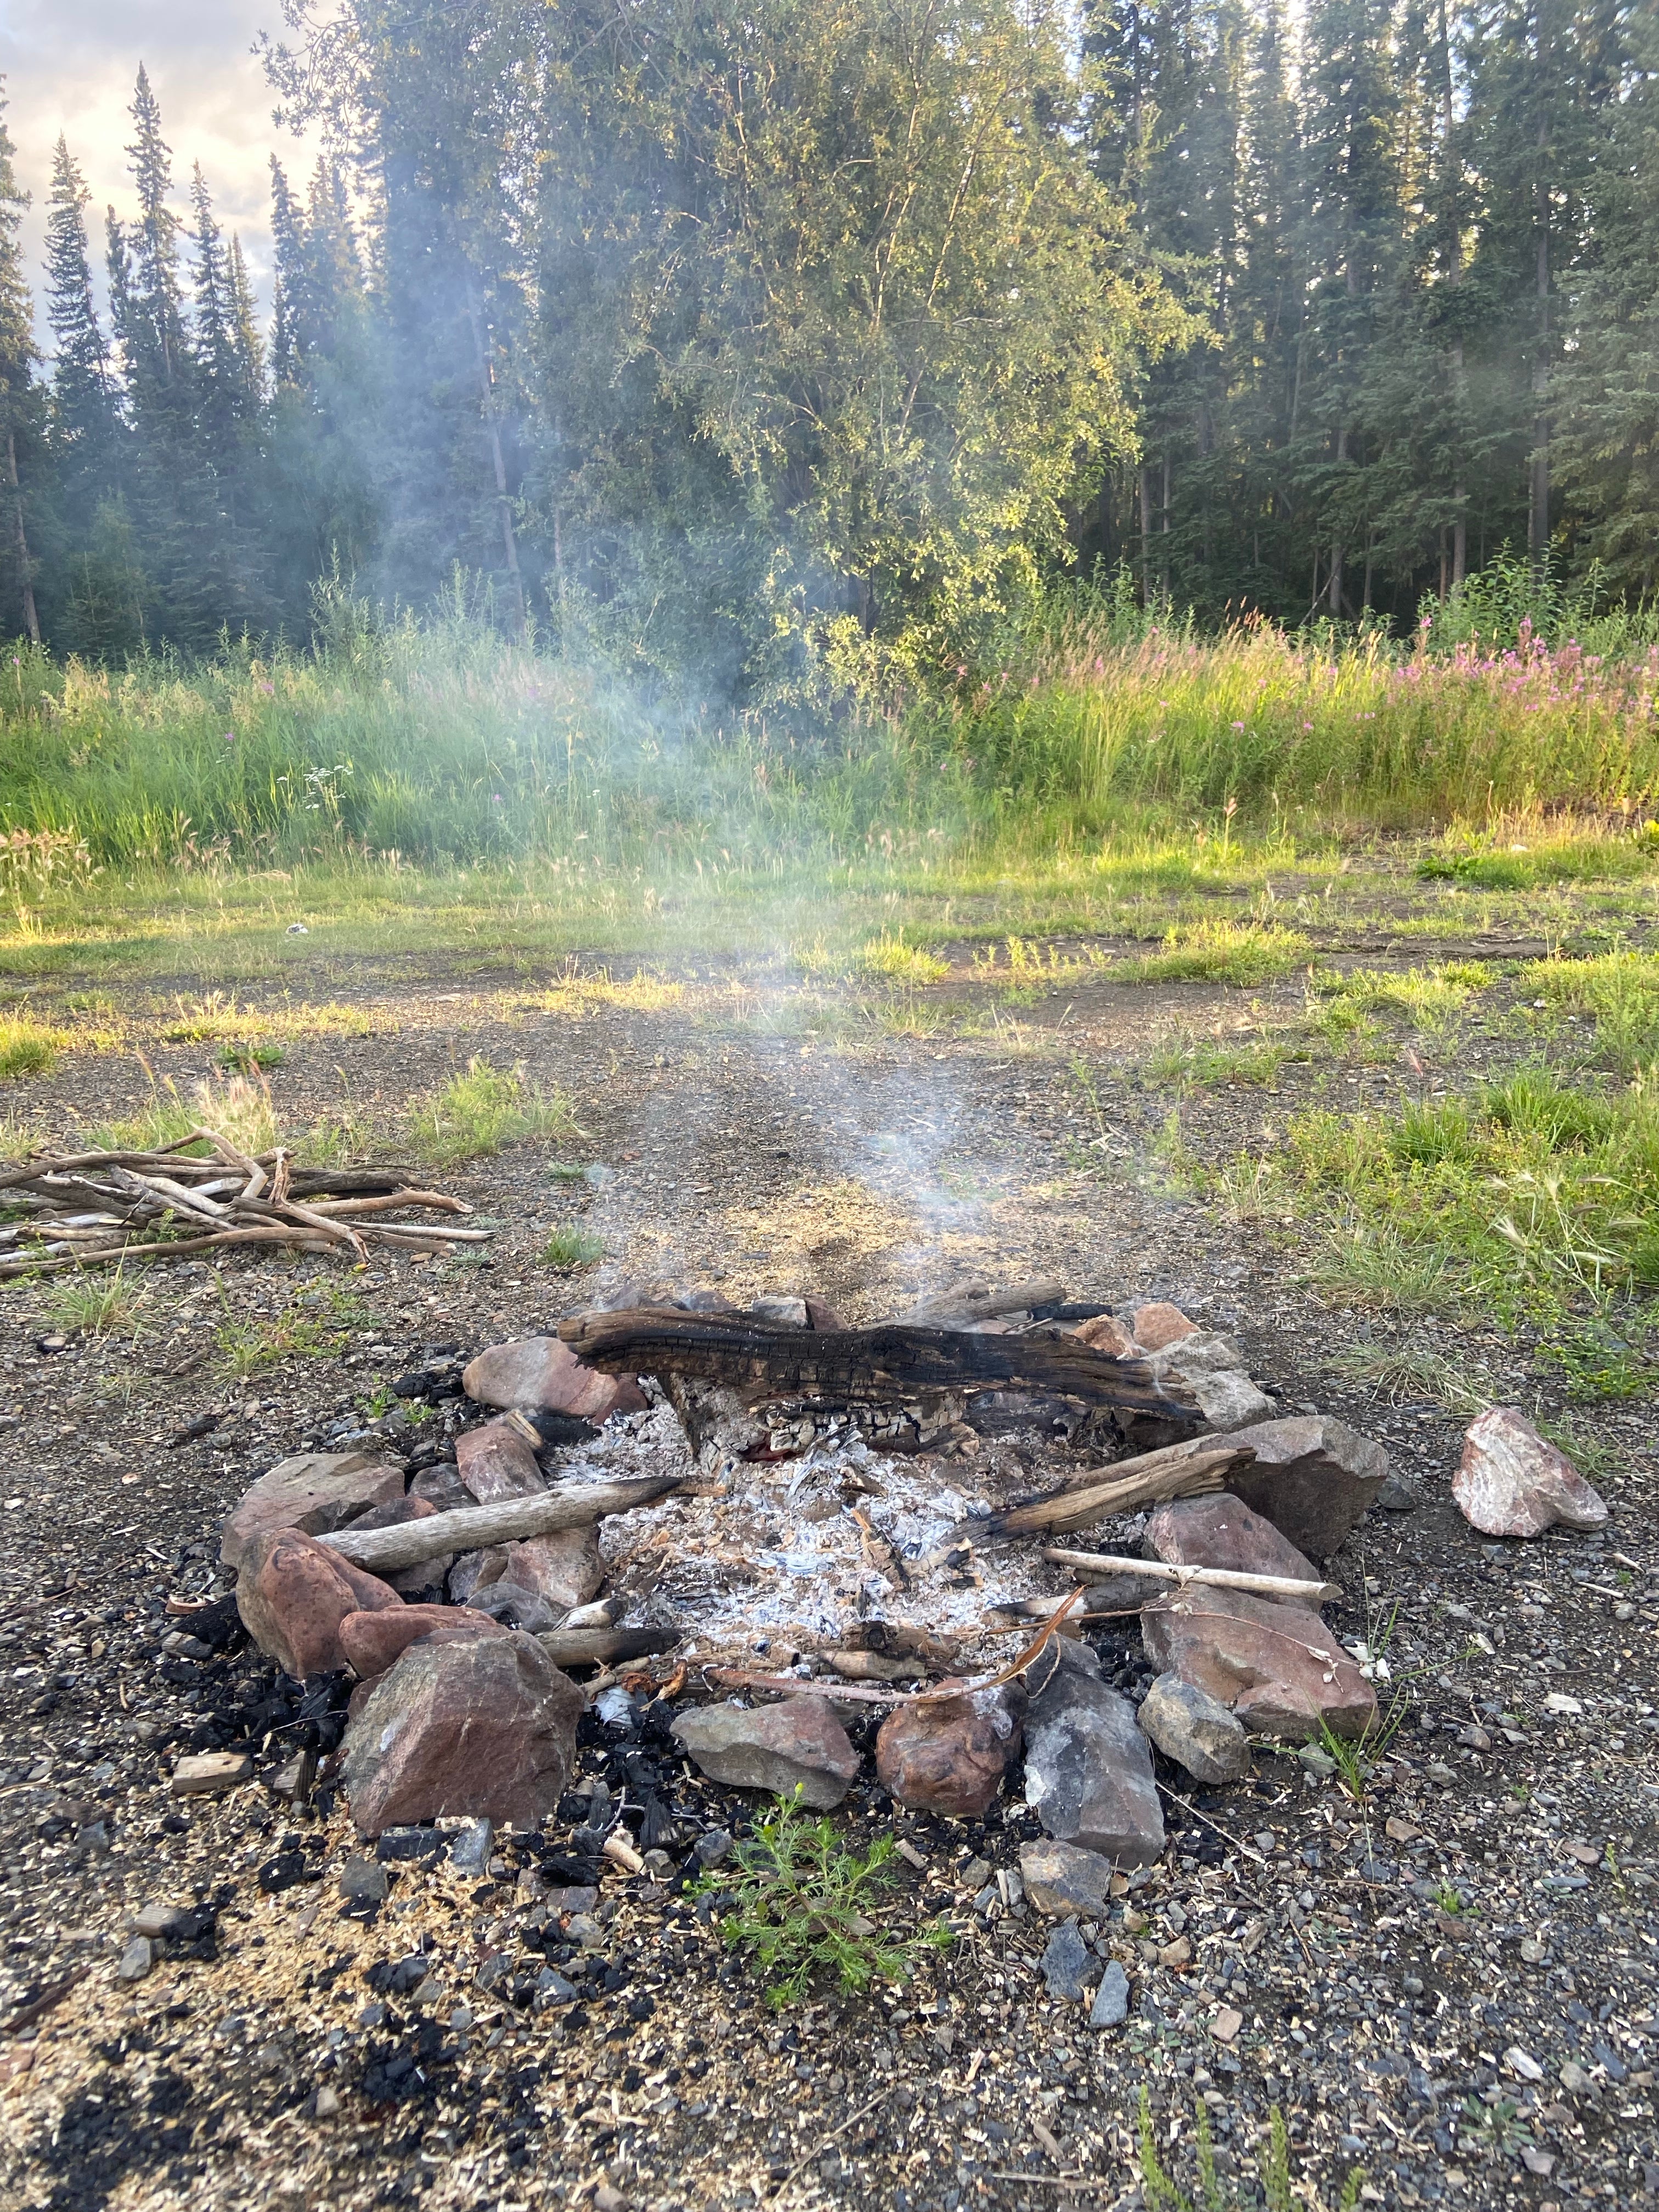 Camper submitted image from Colorado Creek Trailhead Dispersed Camping - 3